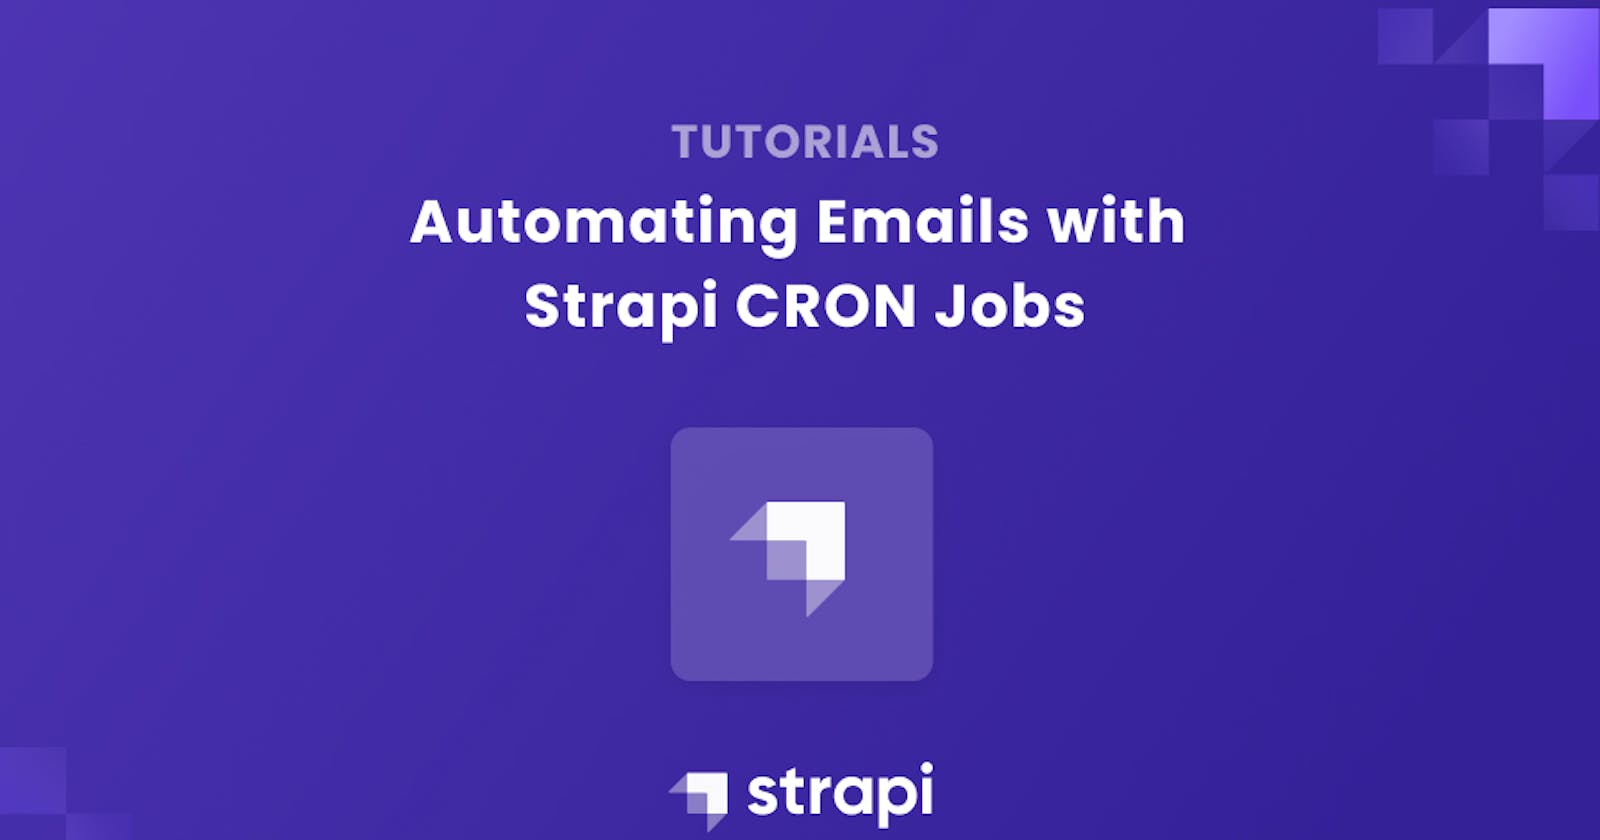 Automating Emails with Strapi CRON Jobs